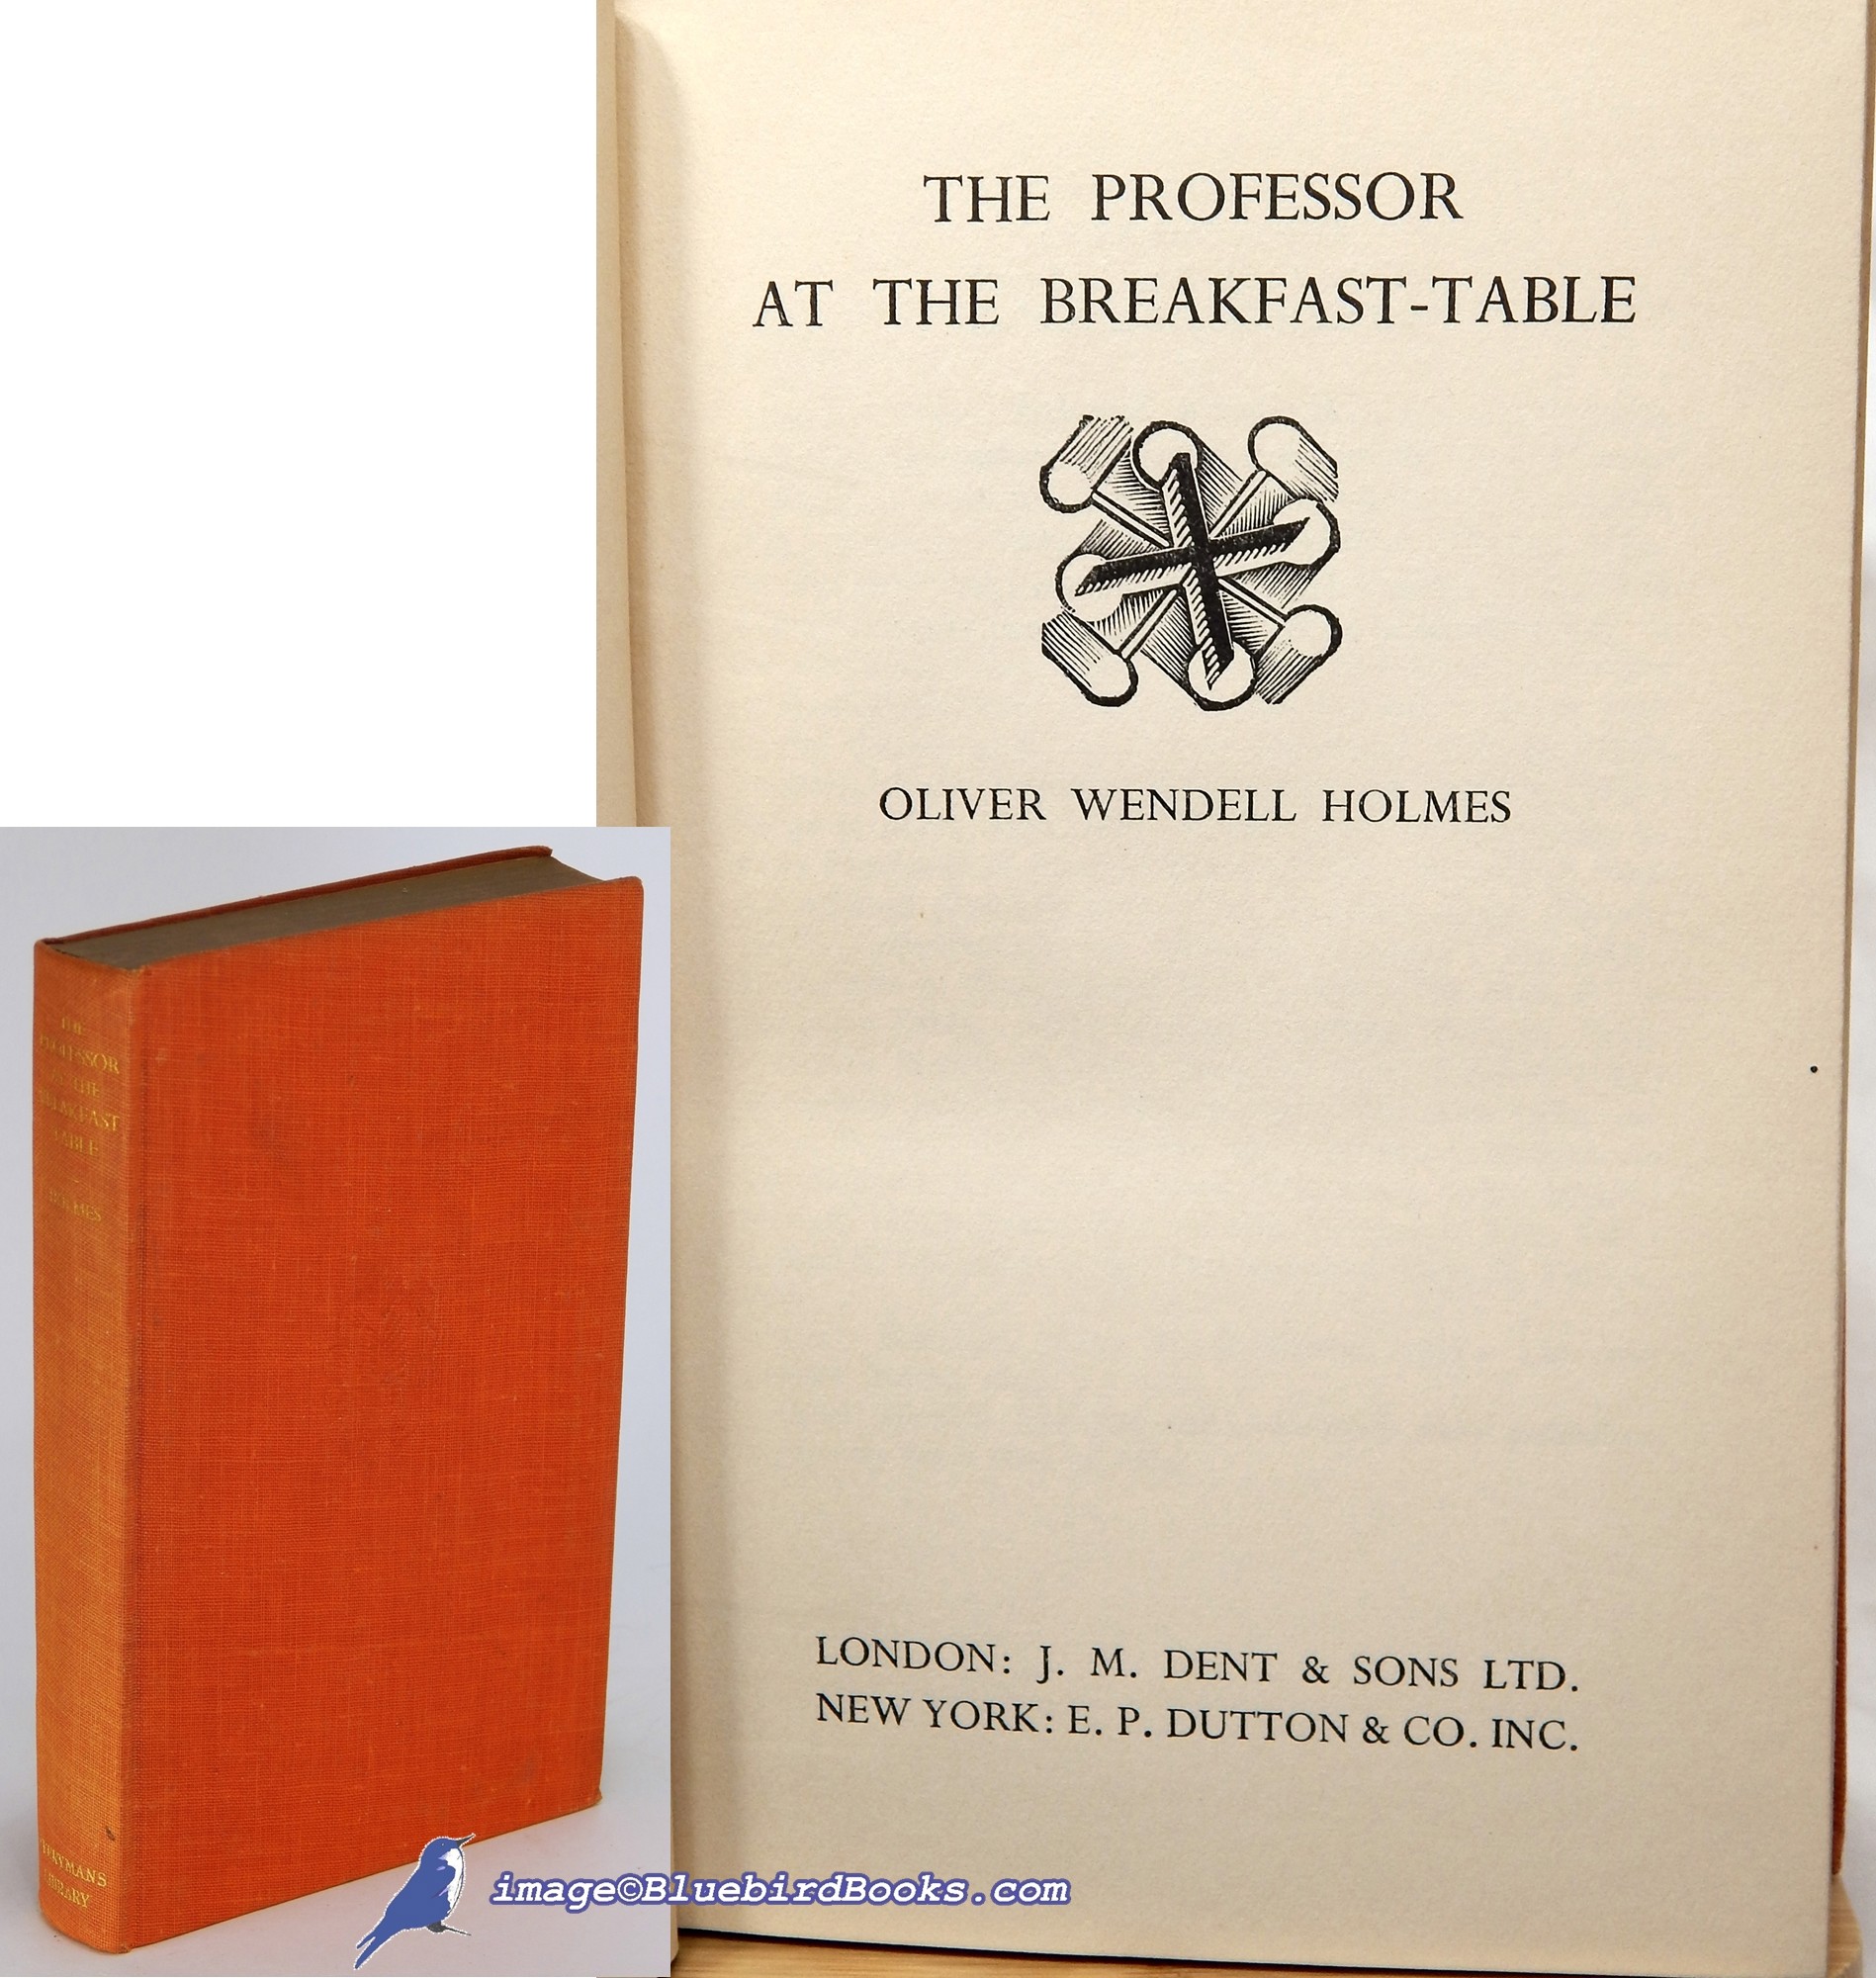 HOLMES, OLIVER WENDELL - The Professor at the Breakfast Table (Everyman's Library #67)